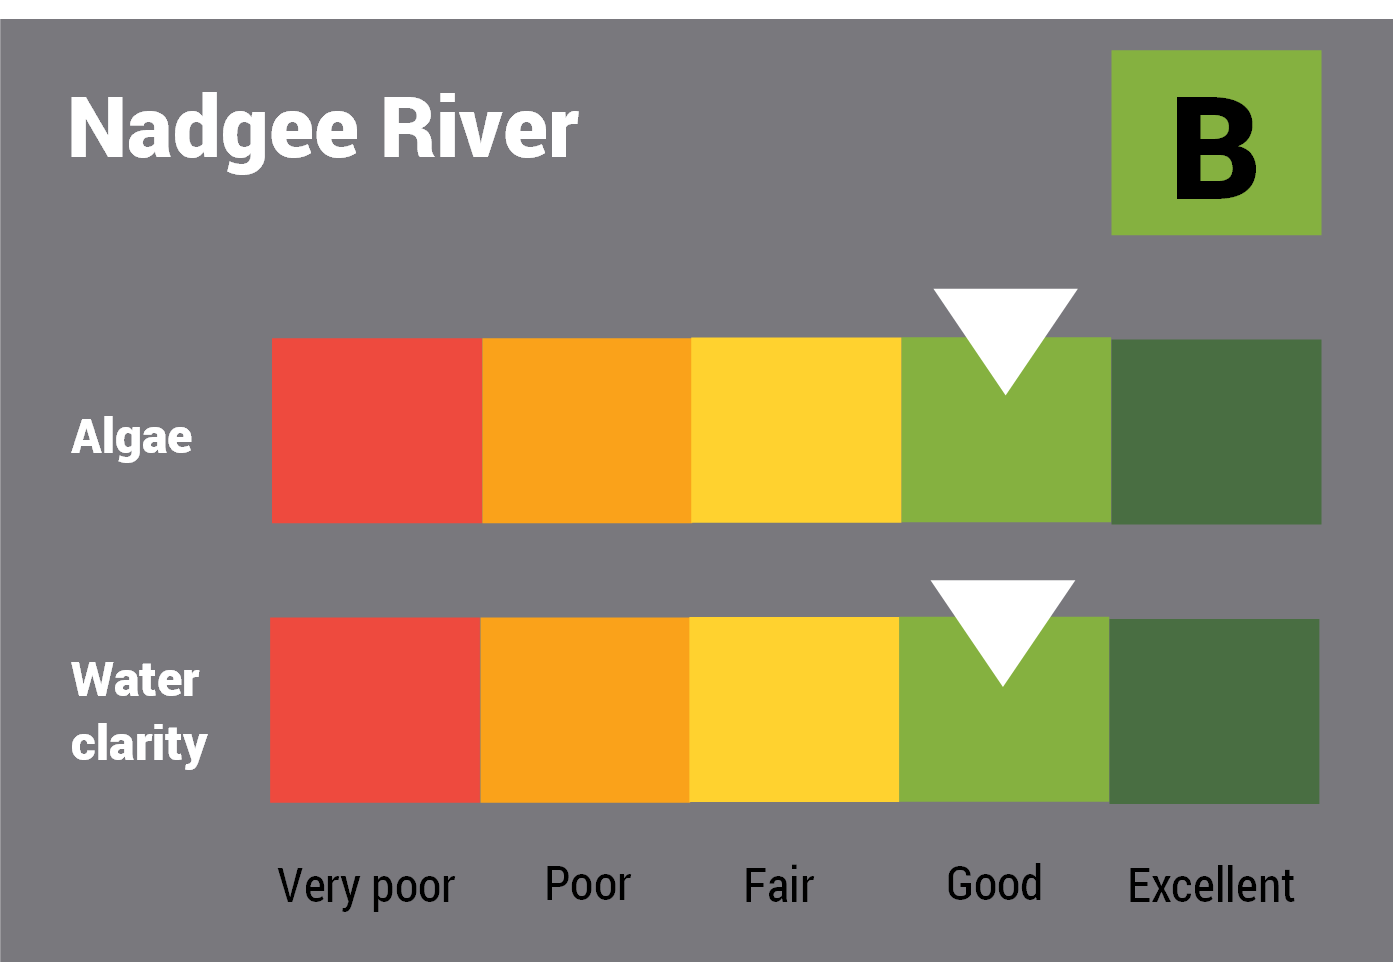 Nadgee River water quality report card for algae and water clarity showing colour-coded ratings (red, orange, yellow, light green and dark green, which represent very poor, poor, fair, good and excellent, respectively). Algae is rated 'good' and water clarity is rated 'good' giving an overall rating of 'good' or 'B'.